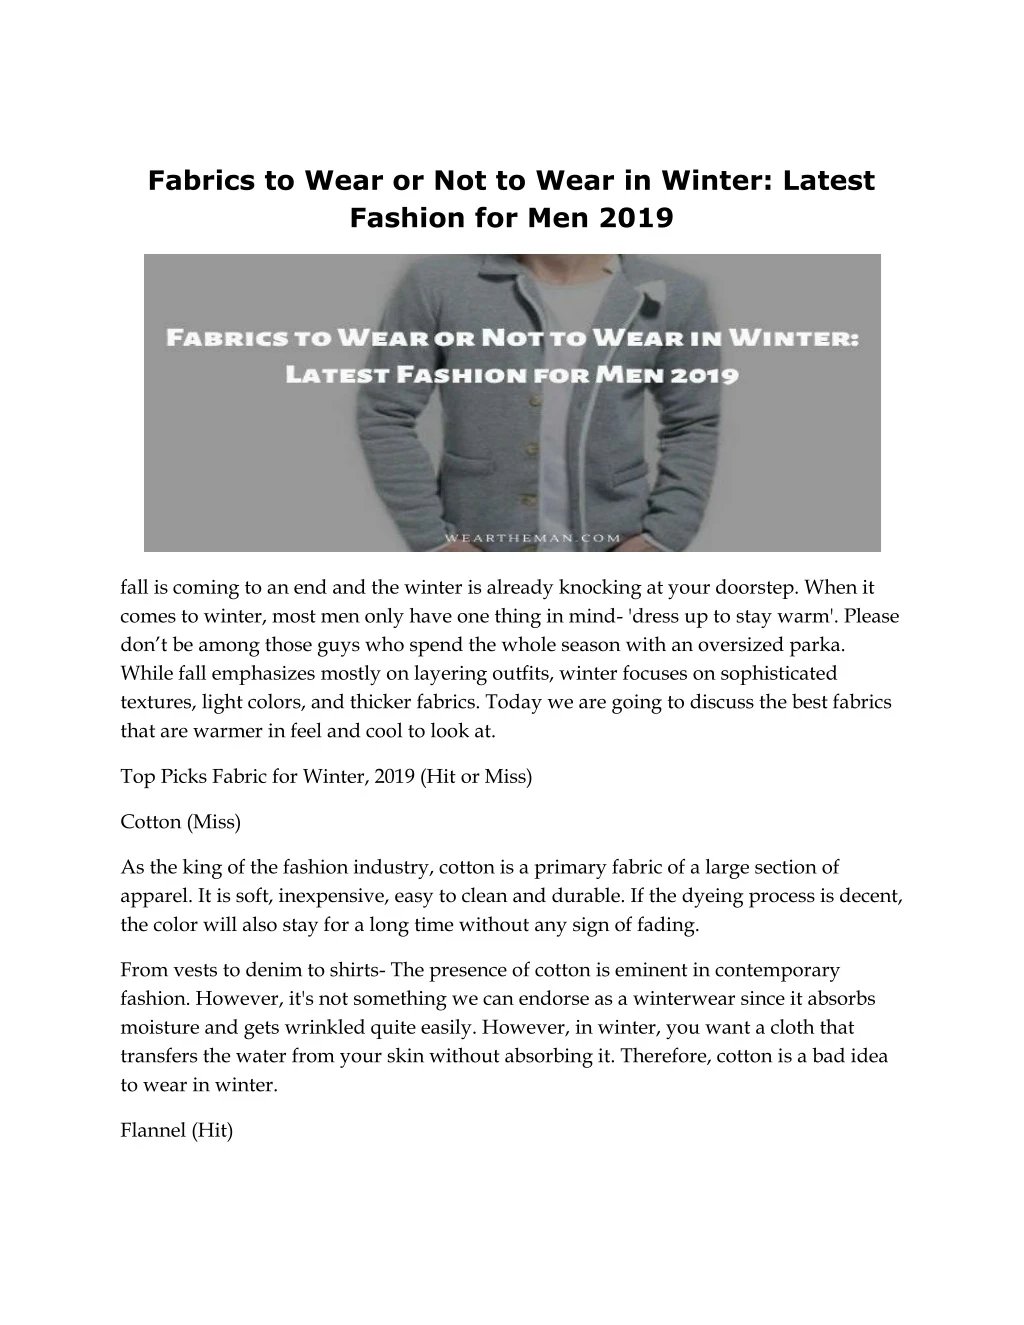 fabrics to wear or not to wear in winter latest